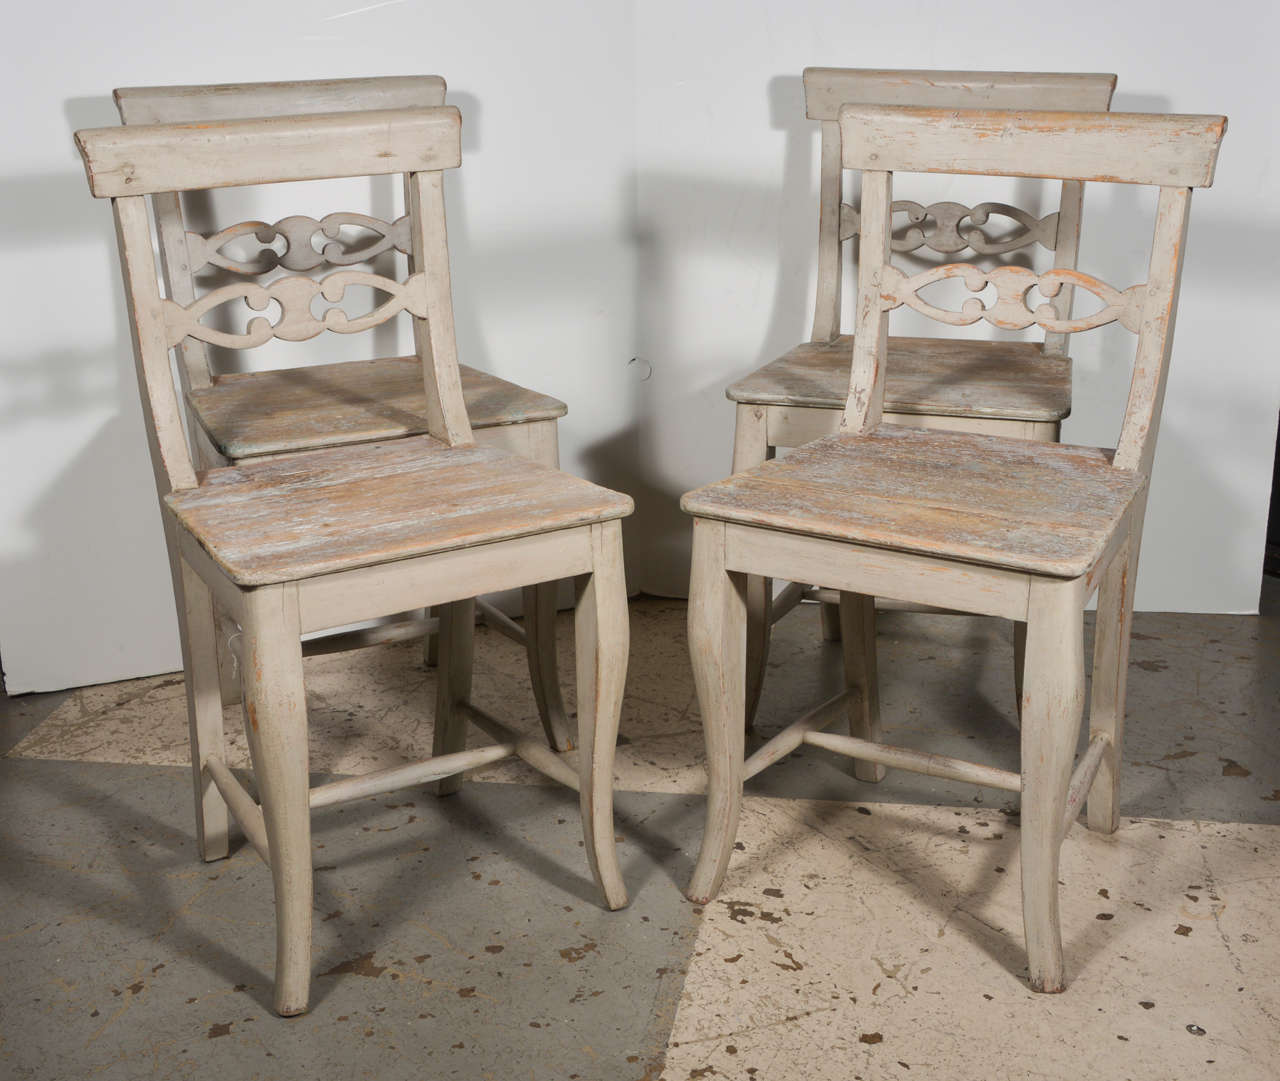 Set of 4 Swedish dining chairs, 19th century. Painted finish